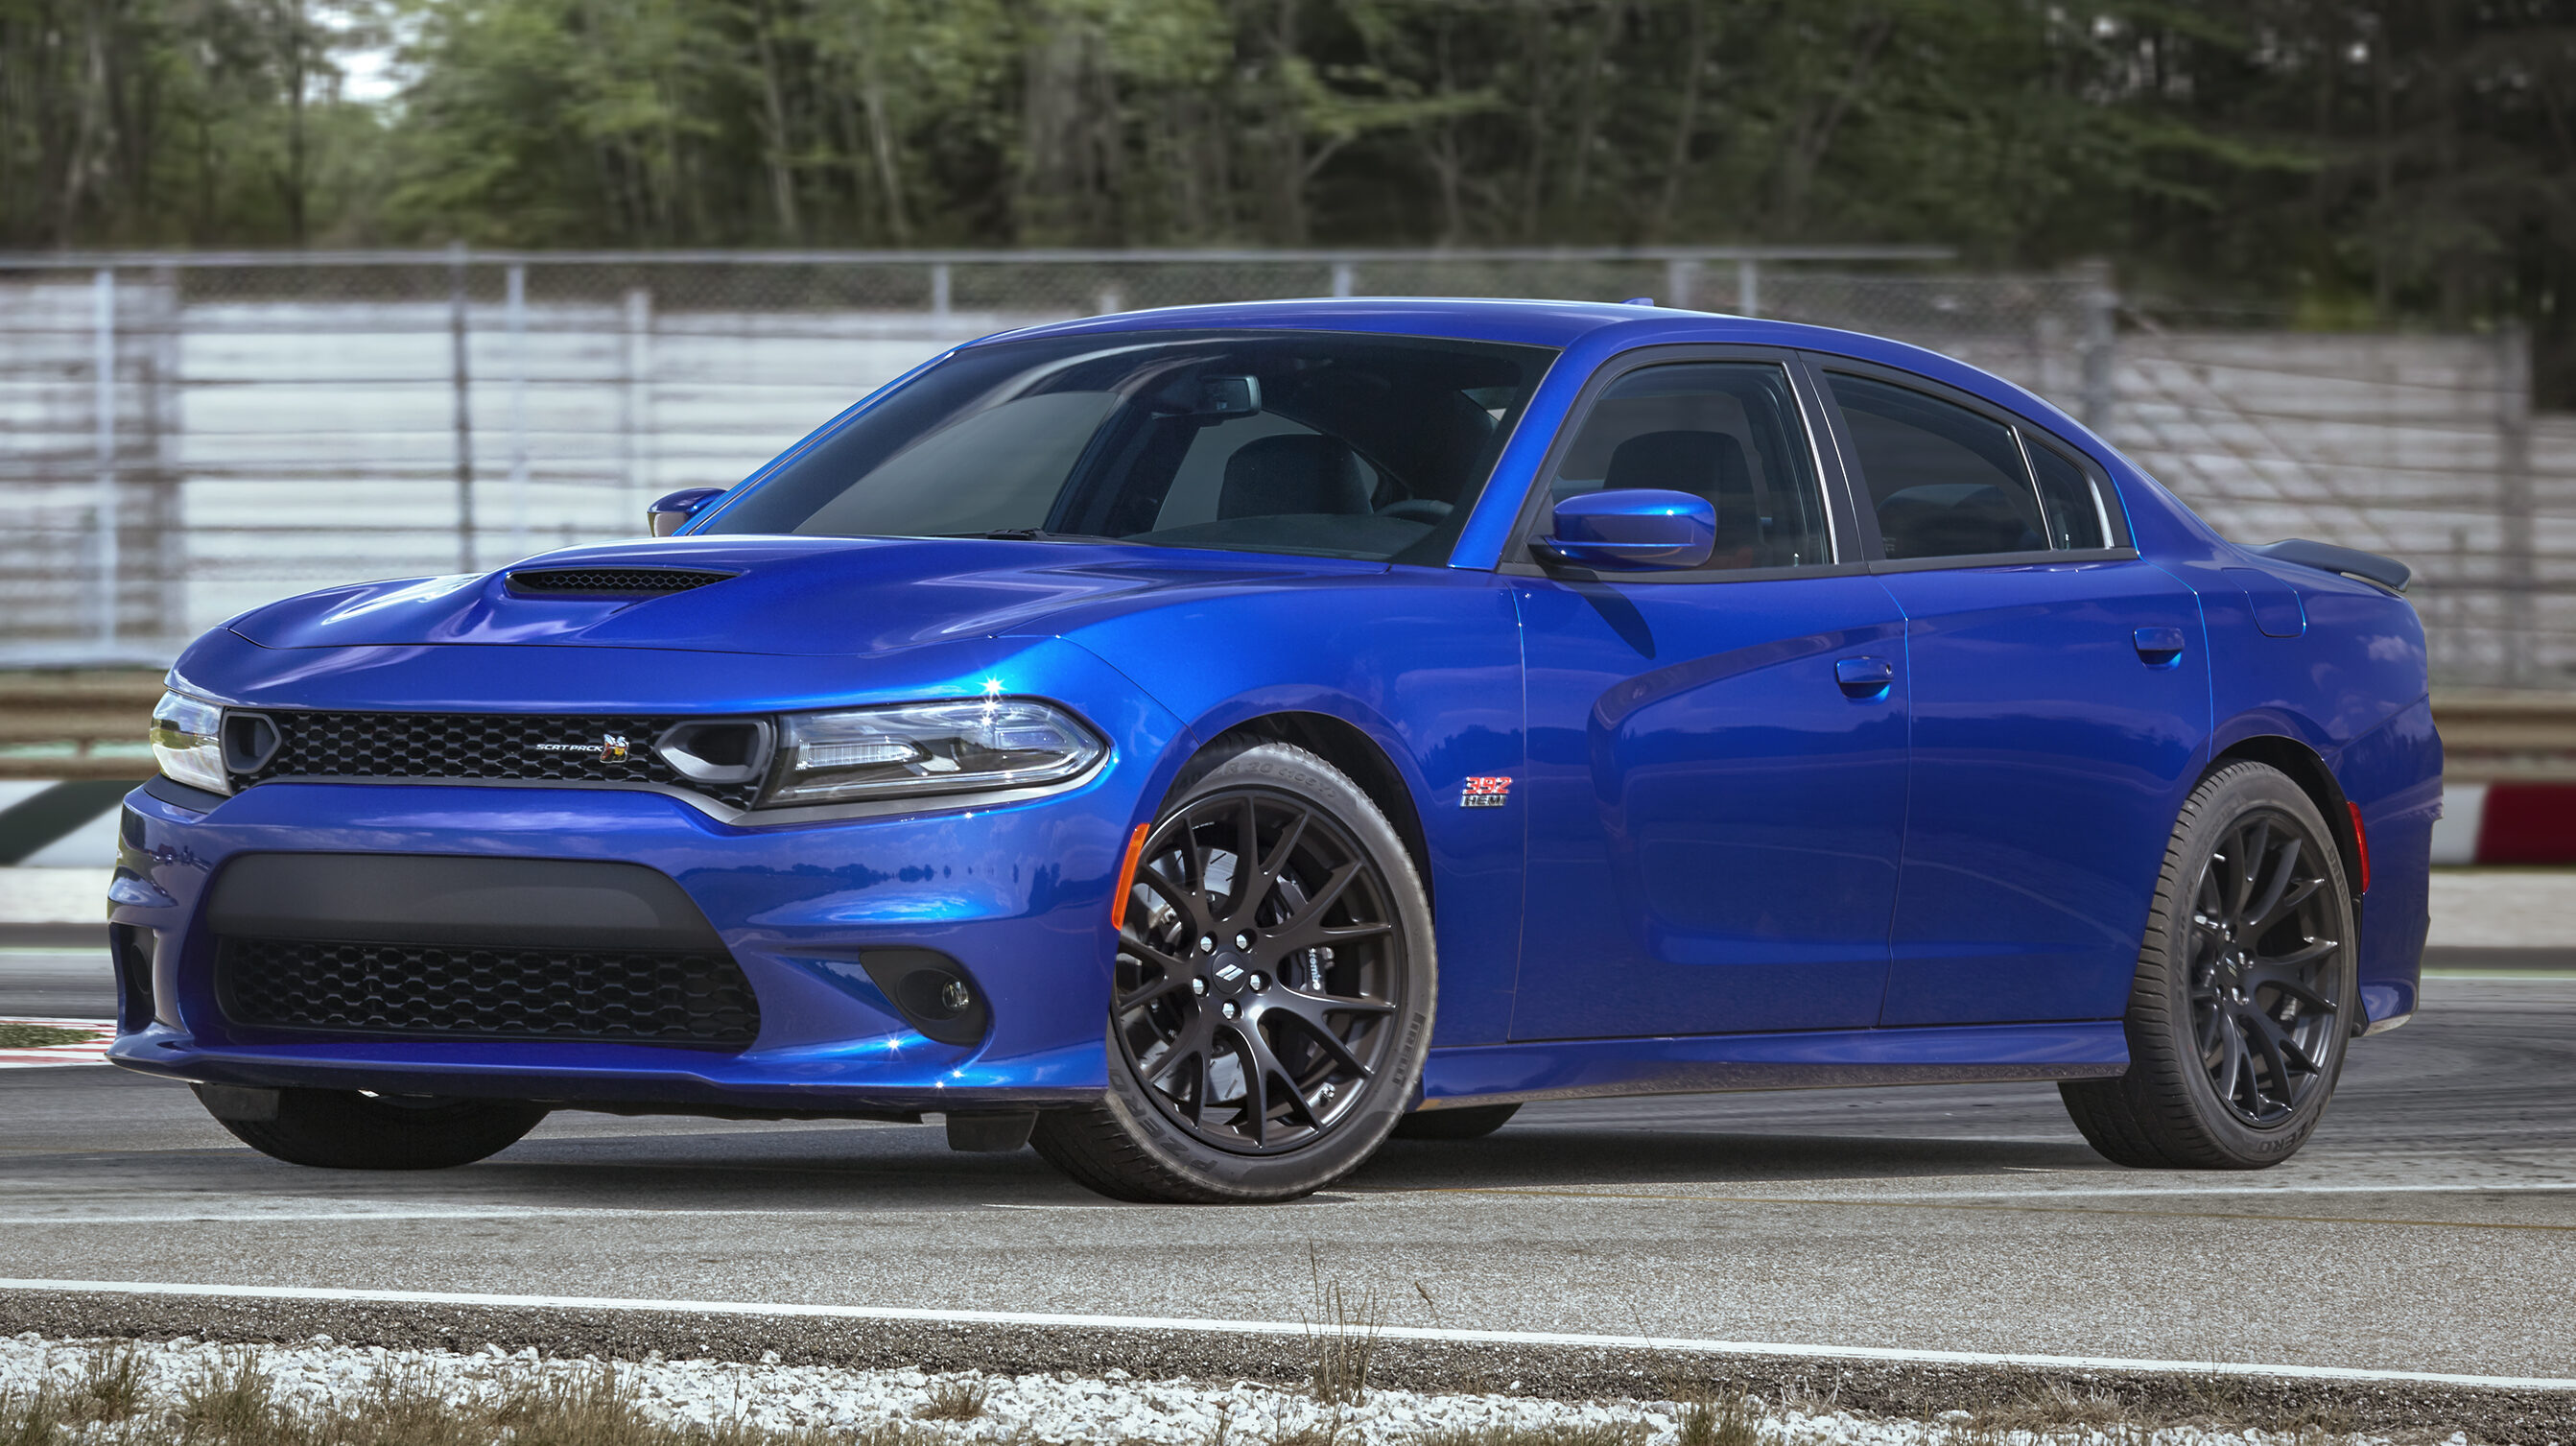 UPDATED: 2019 Dodge Charger R/T Scat Pack Options & Pricing List